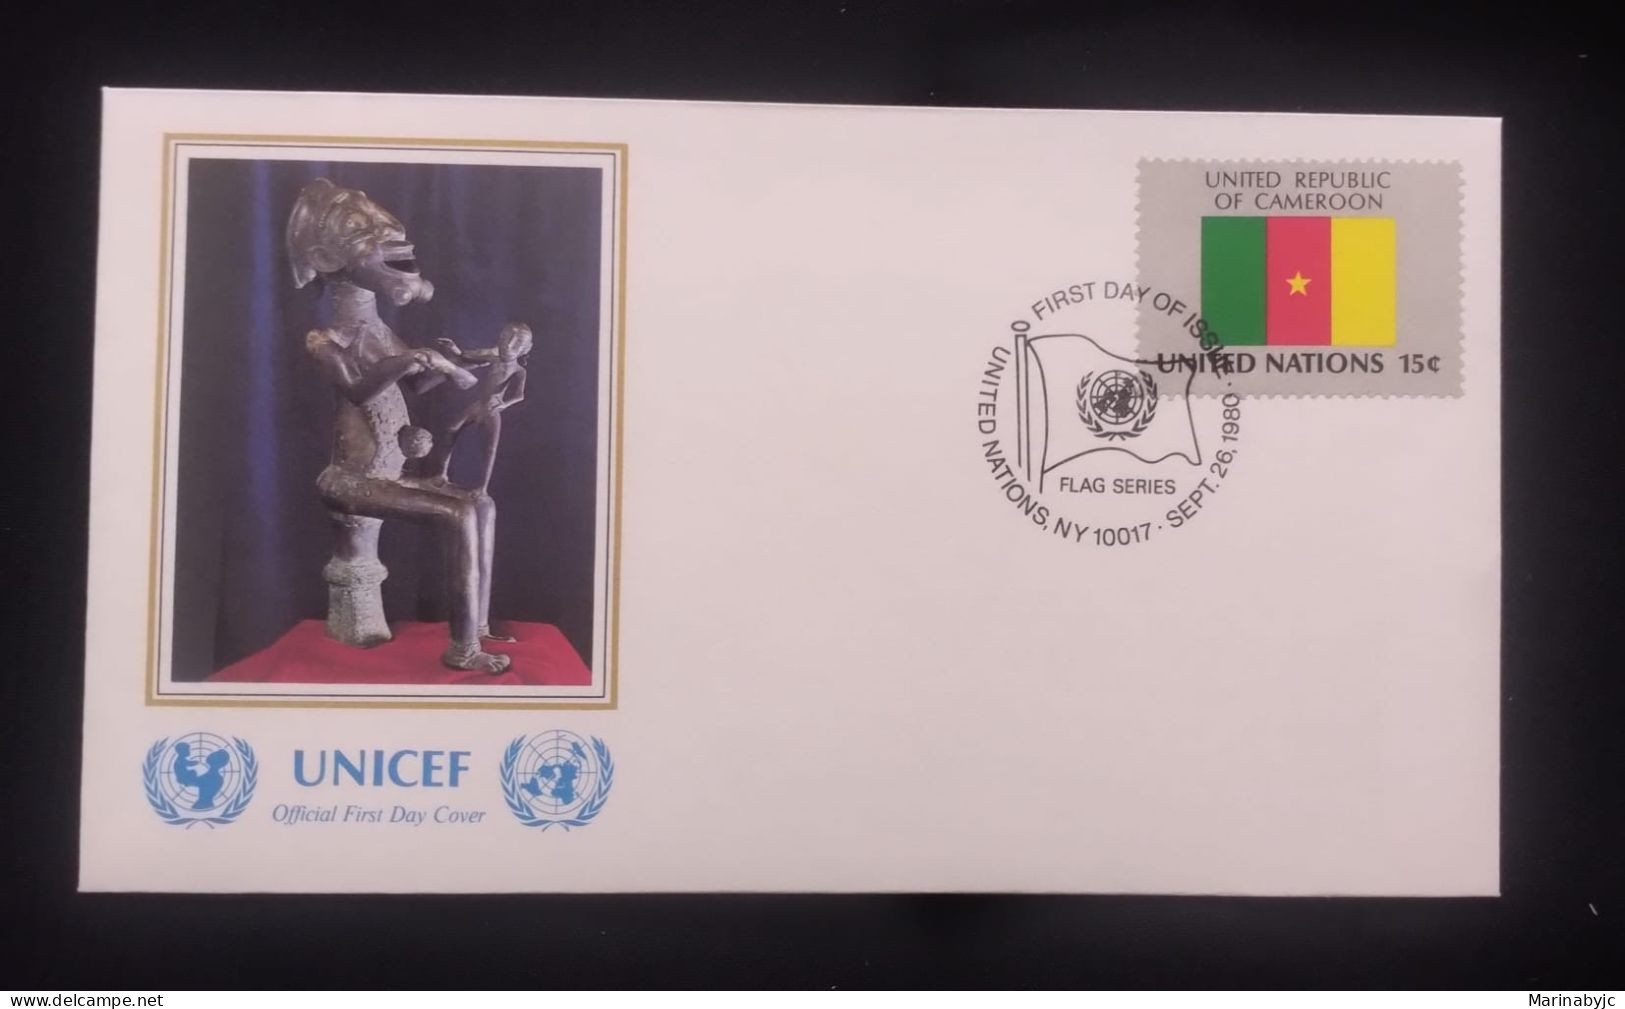 EL)1980 UNITED NATIONS, NATIONAL FLAG OF THE MEMBER COUNTRIES, CAMEROON, UNICEF, ARCHEOLOGY, FDC - Neufs